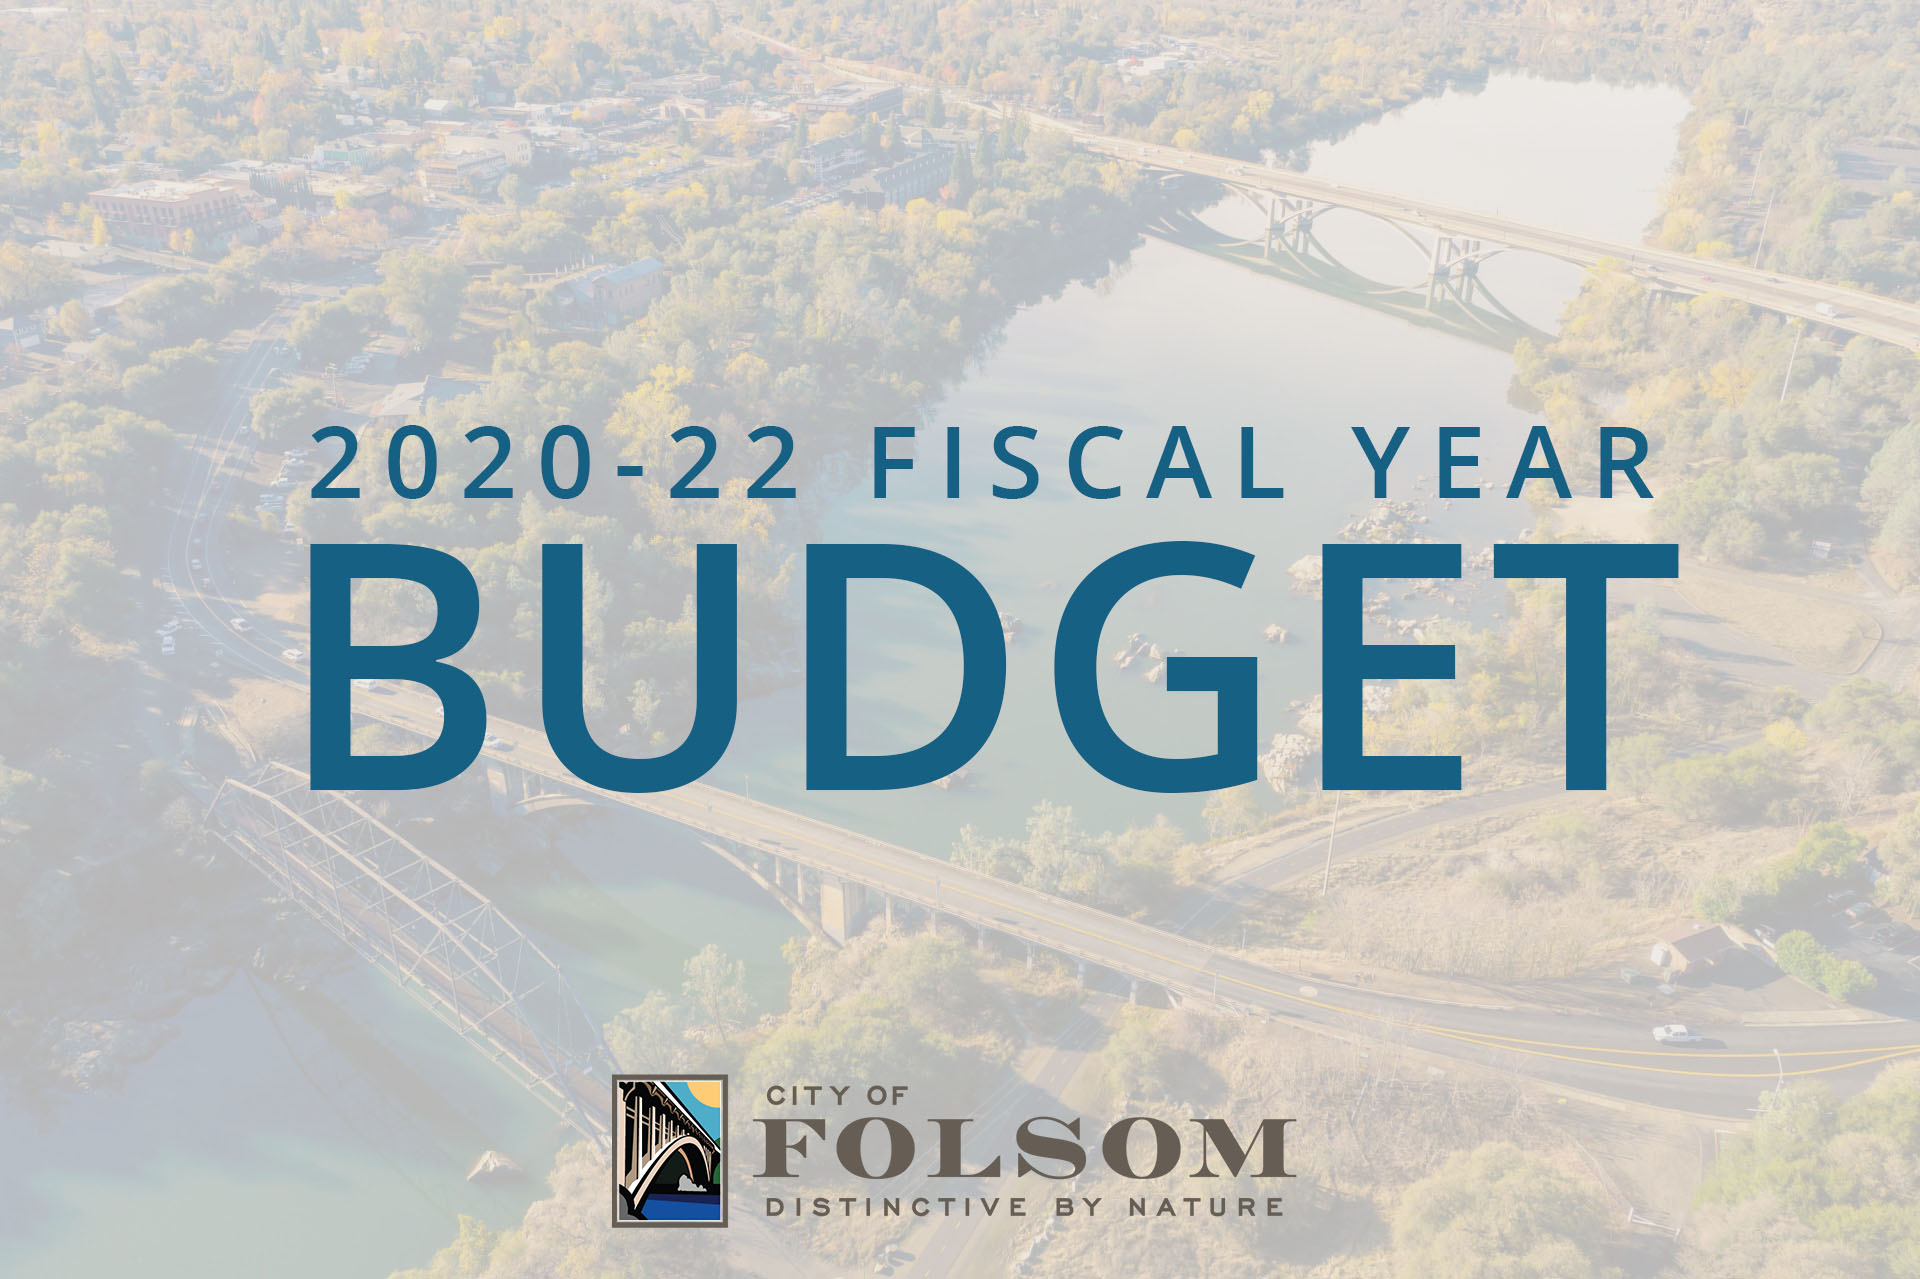 2020-22 Fiscal Year Budget graphic in blue text with a colored city of folsom logo at the bottom, with a white overlay over a picture of Rainbow Bridge and the Historic District aerial shot